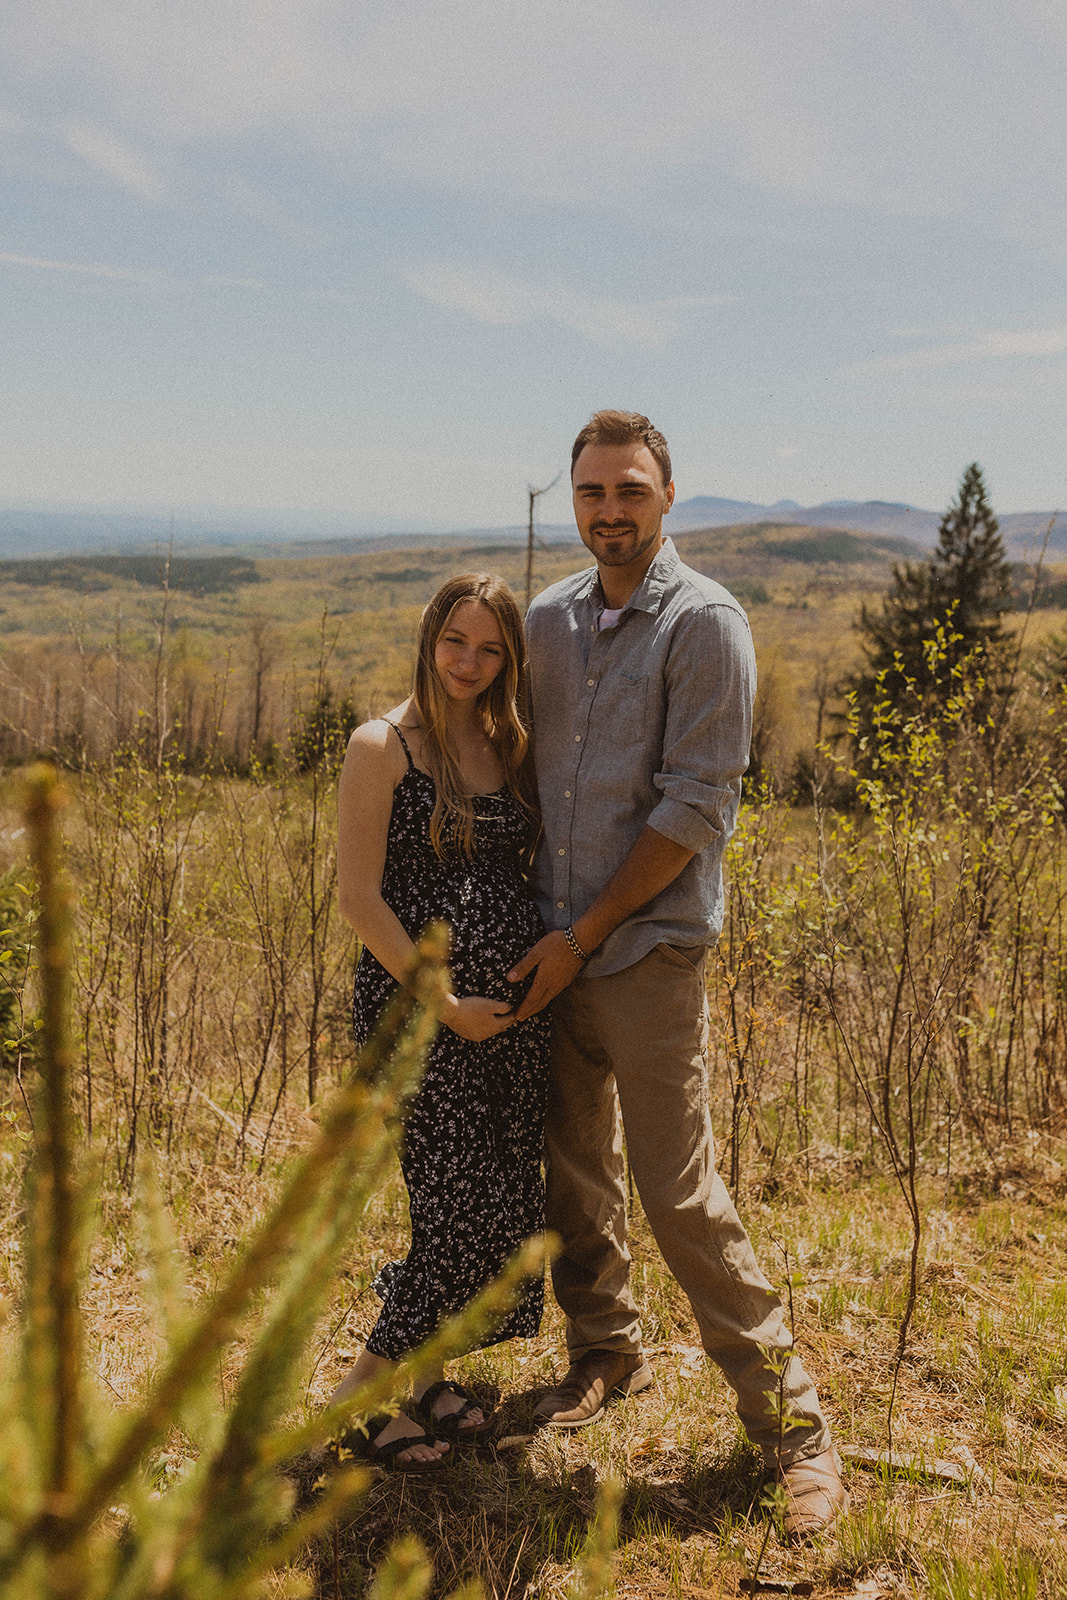 Future parents pose intimately together during their mountainside maternity photos 